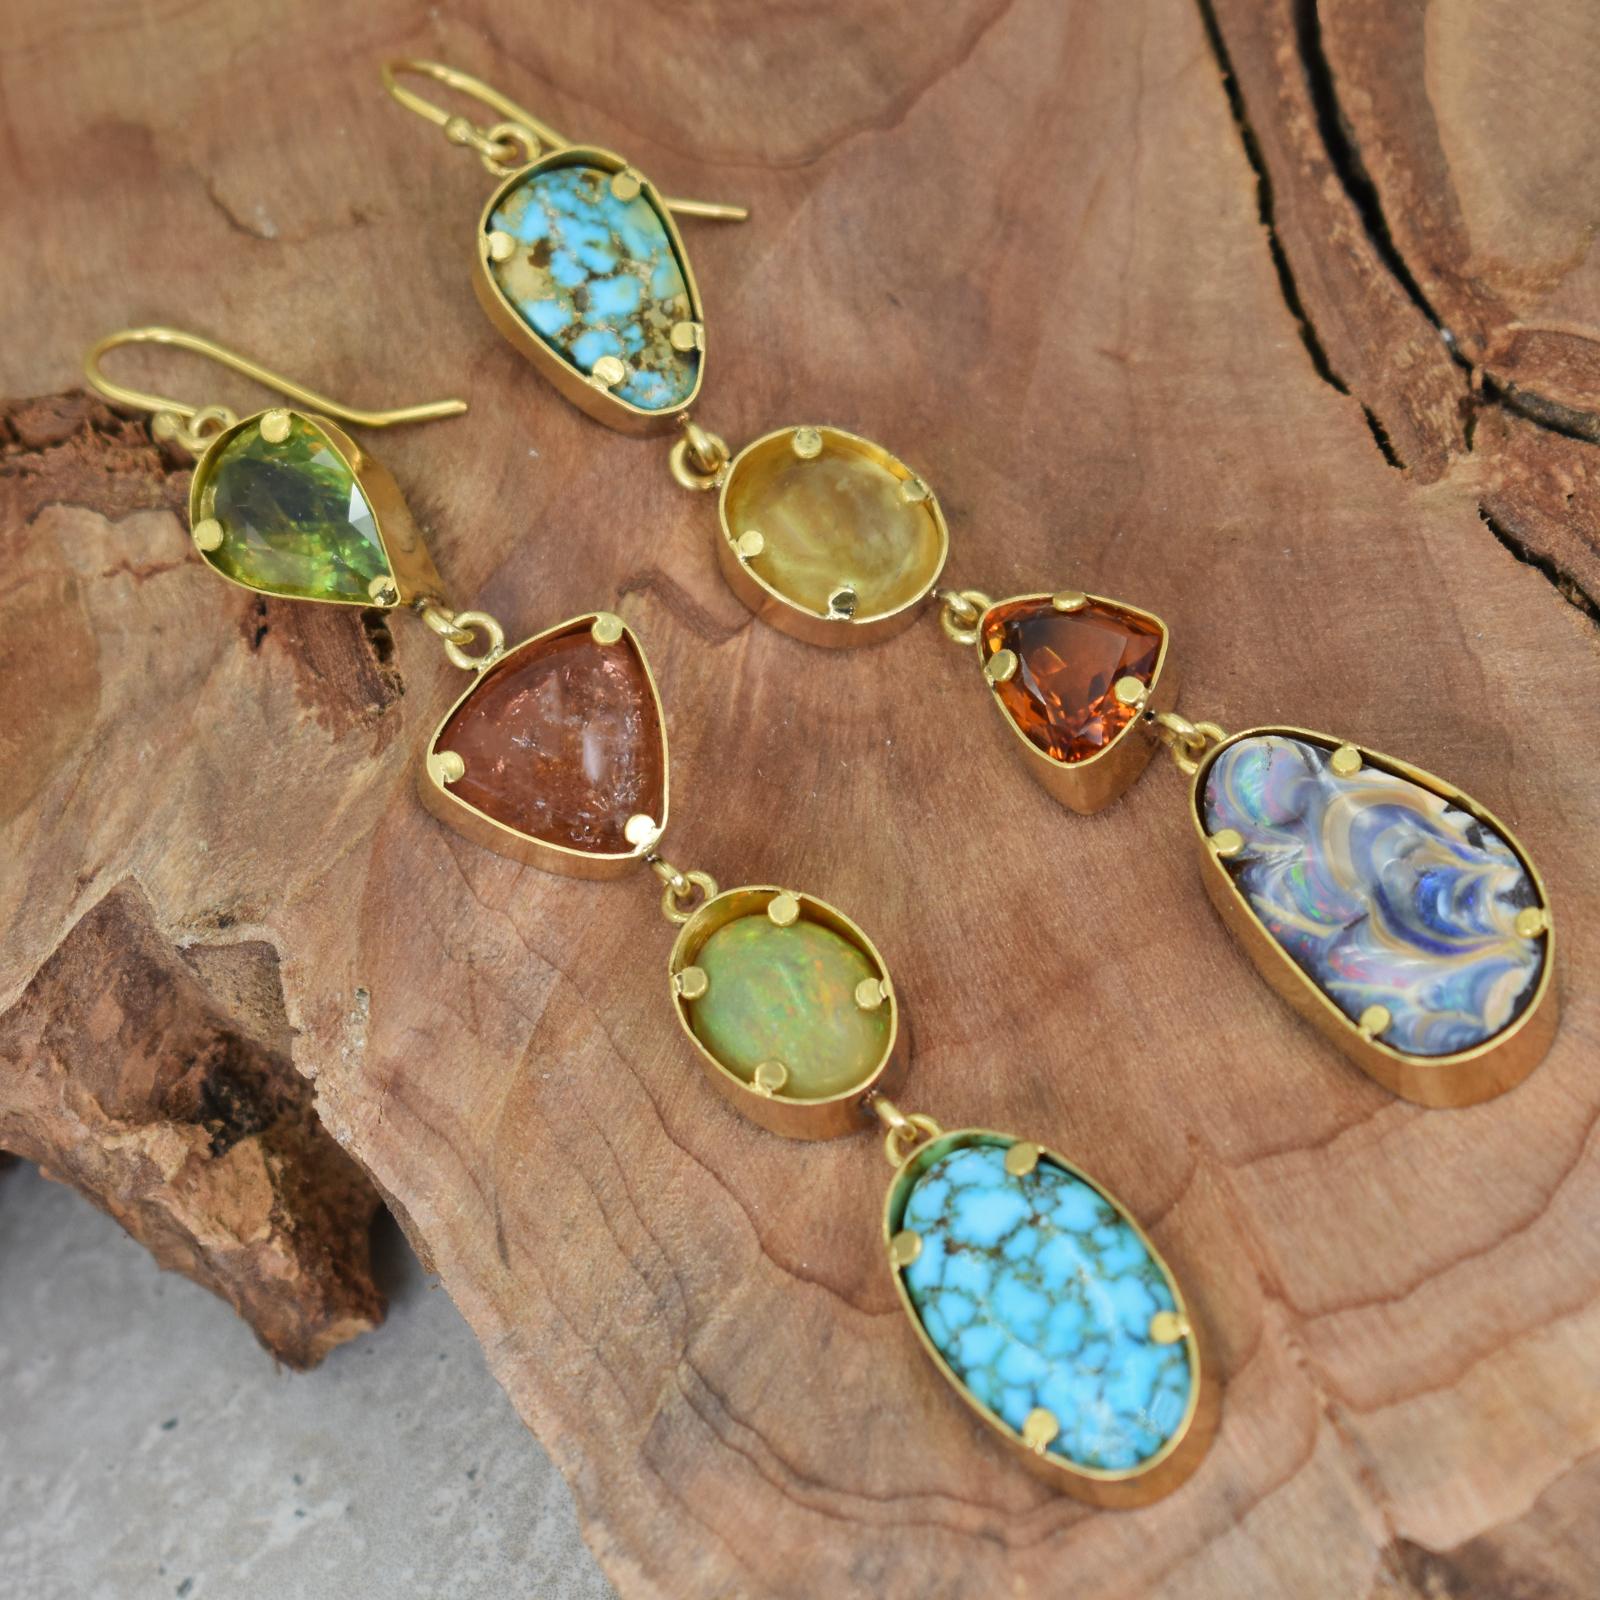 Four tier, hand forged 22k yellow gold shoulder duster earrings featuring Sphene (7.6 ct), Pink Tourmaline (7.2 ct), Ethiopian Opal (4.9 ct), Turquoise Mountain Turquoise (17.5 cttw), Yellow Tourmaline (10.1 ct), Citrine (3.9 ct), and Australian